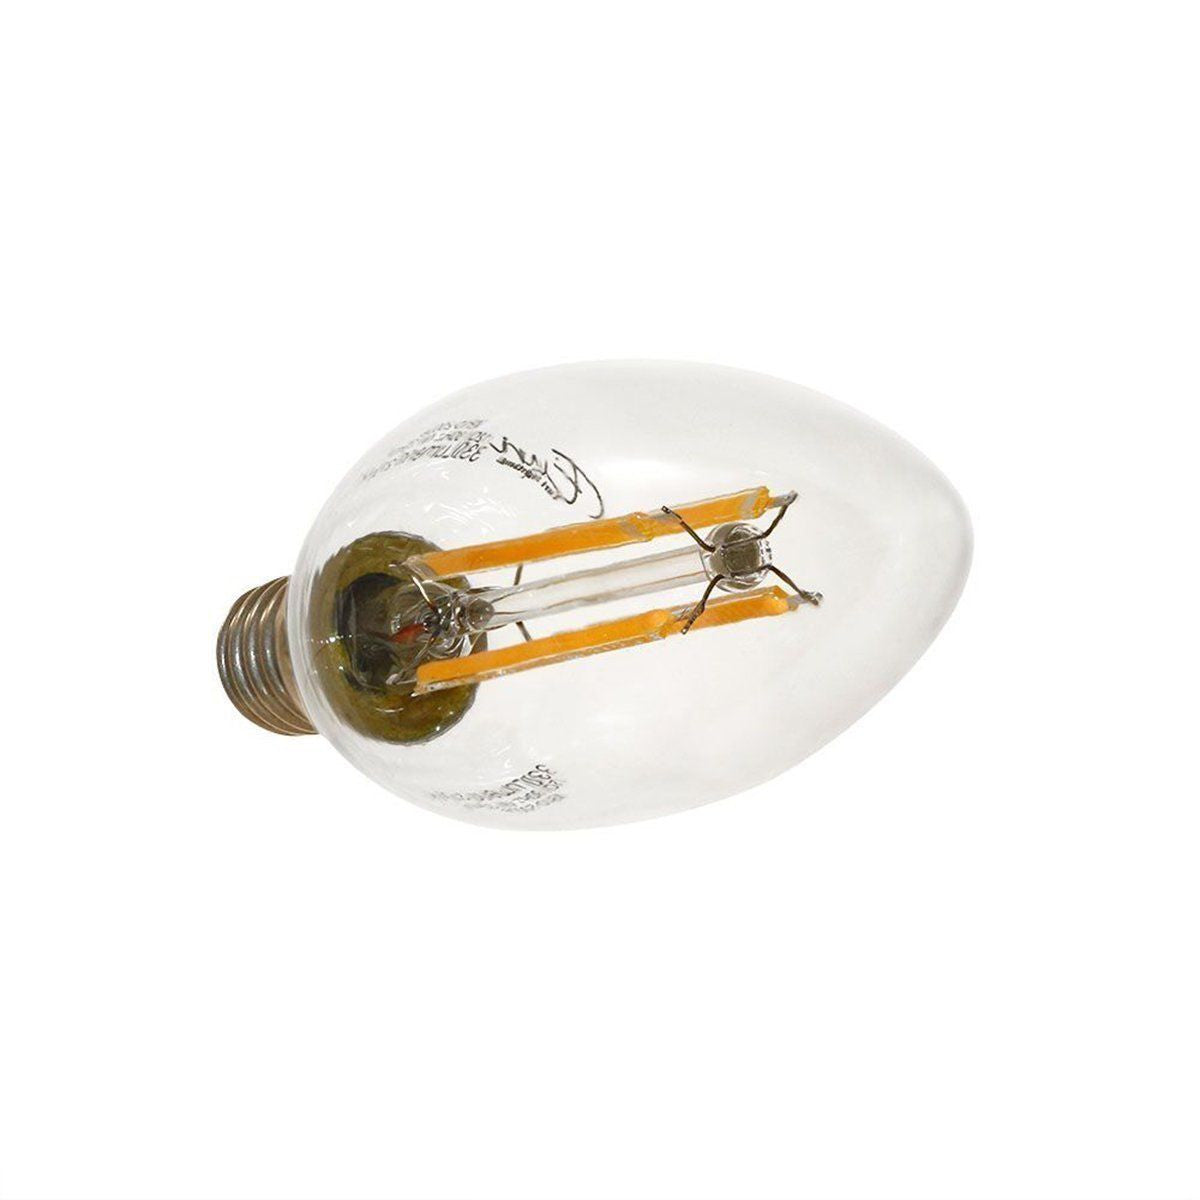 Filament Style Candelabra LED Bulb 40 Watt Equivalent Dimmable by Euri